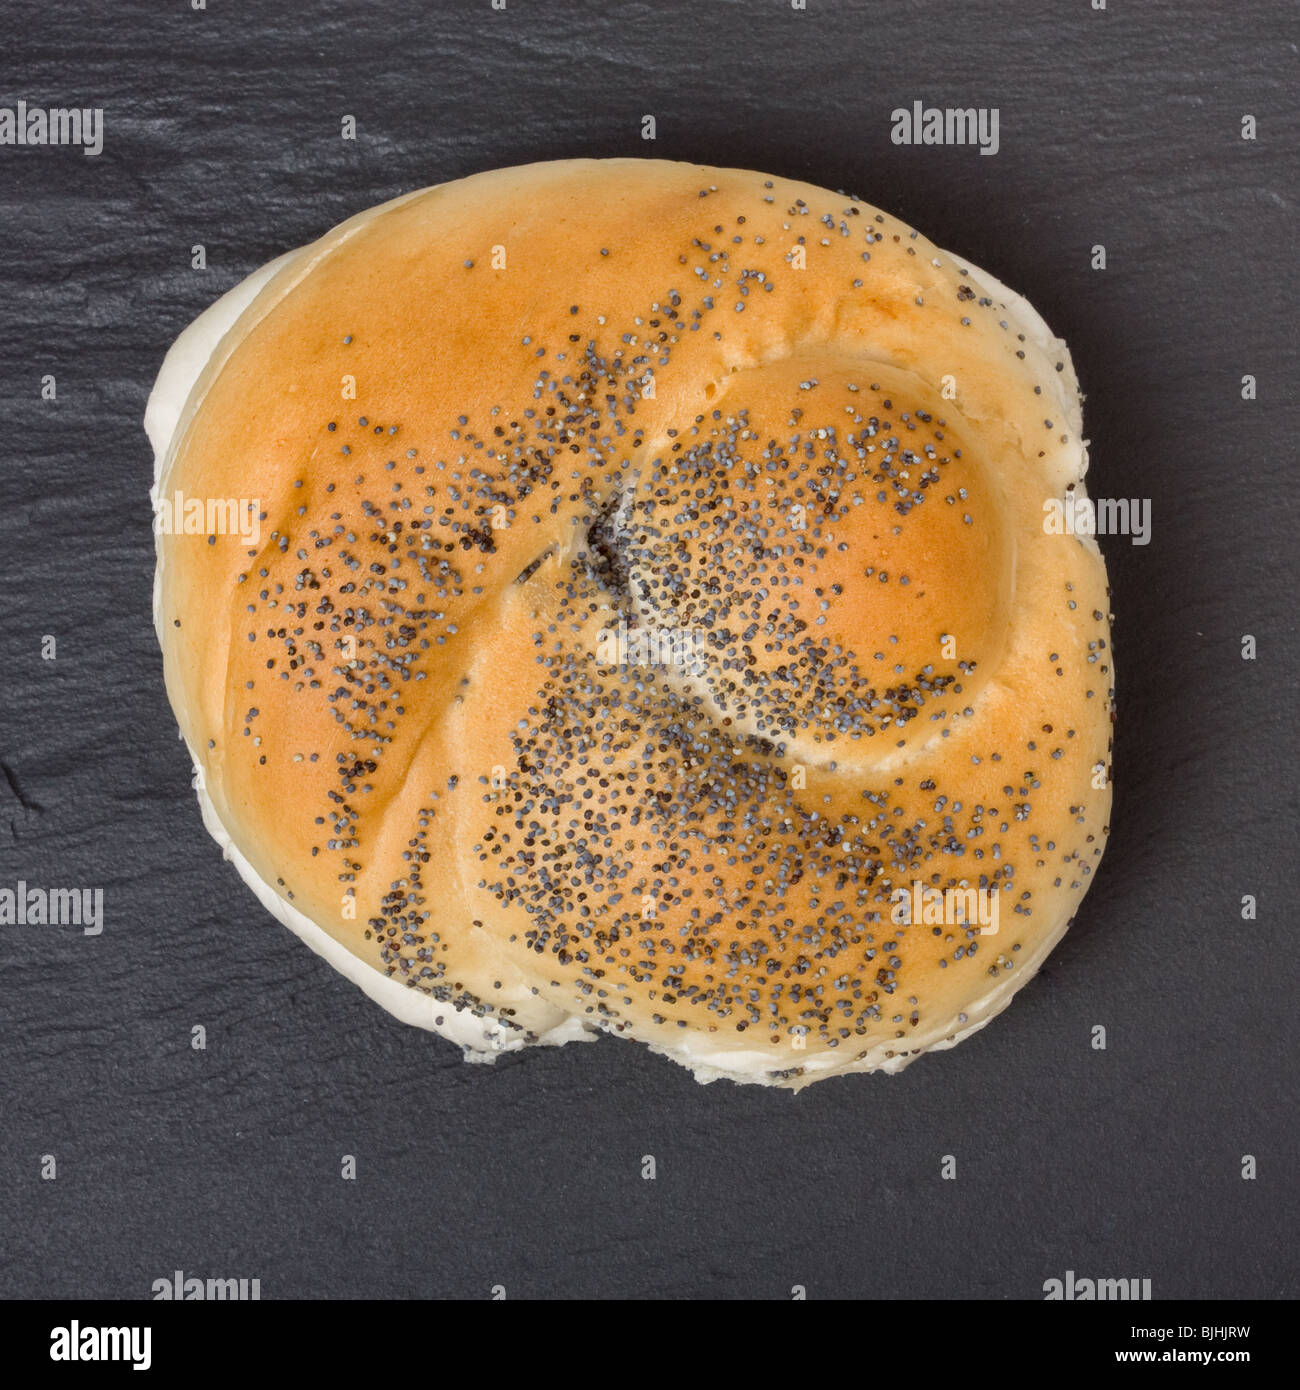 Seeded bread roll from high viewpoint against dark slate background. Stock Photo